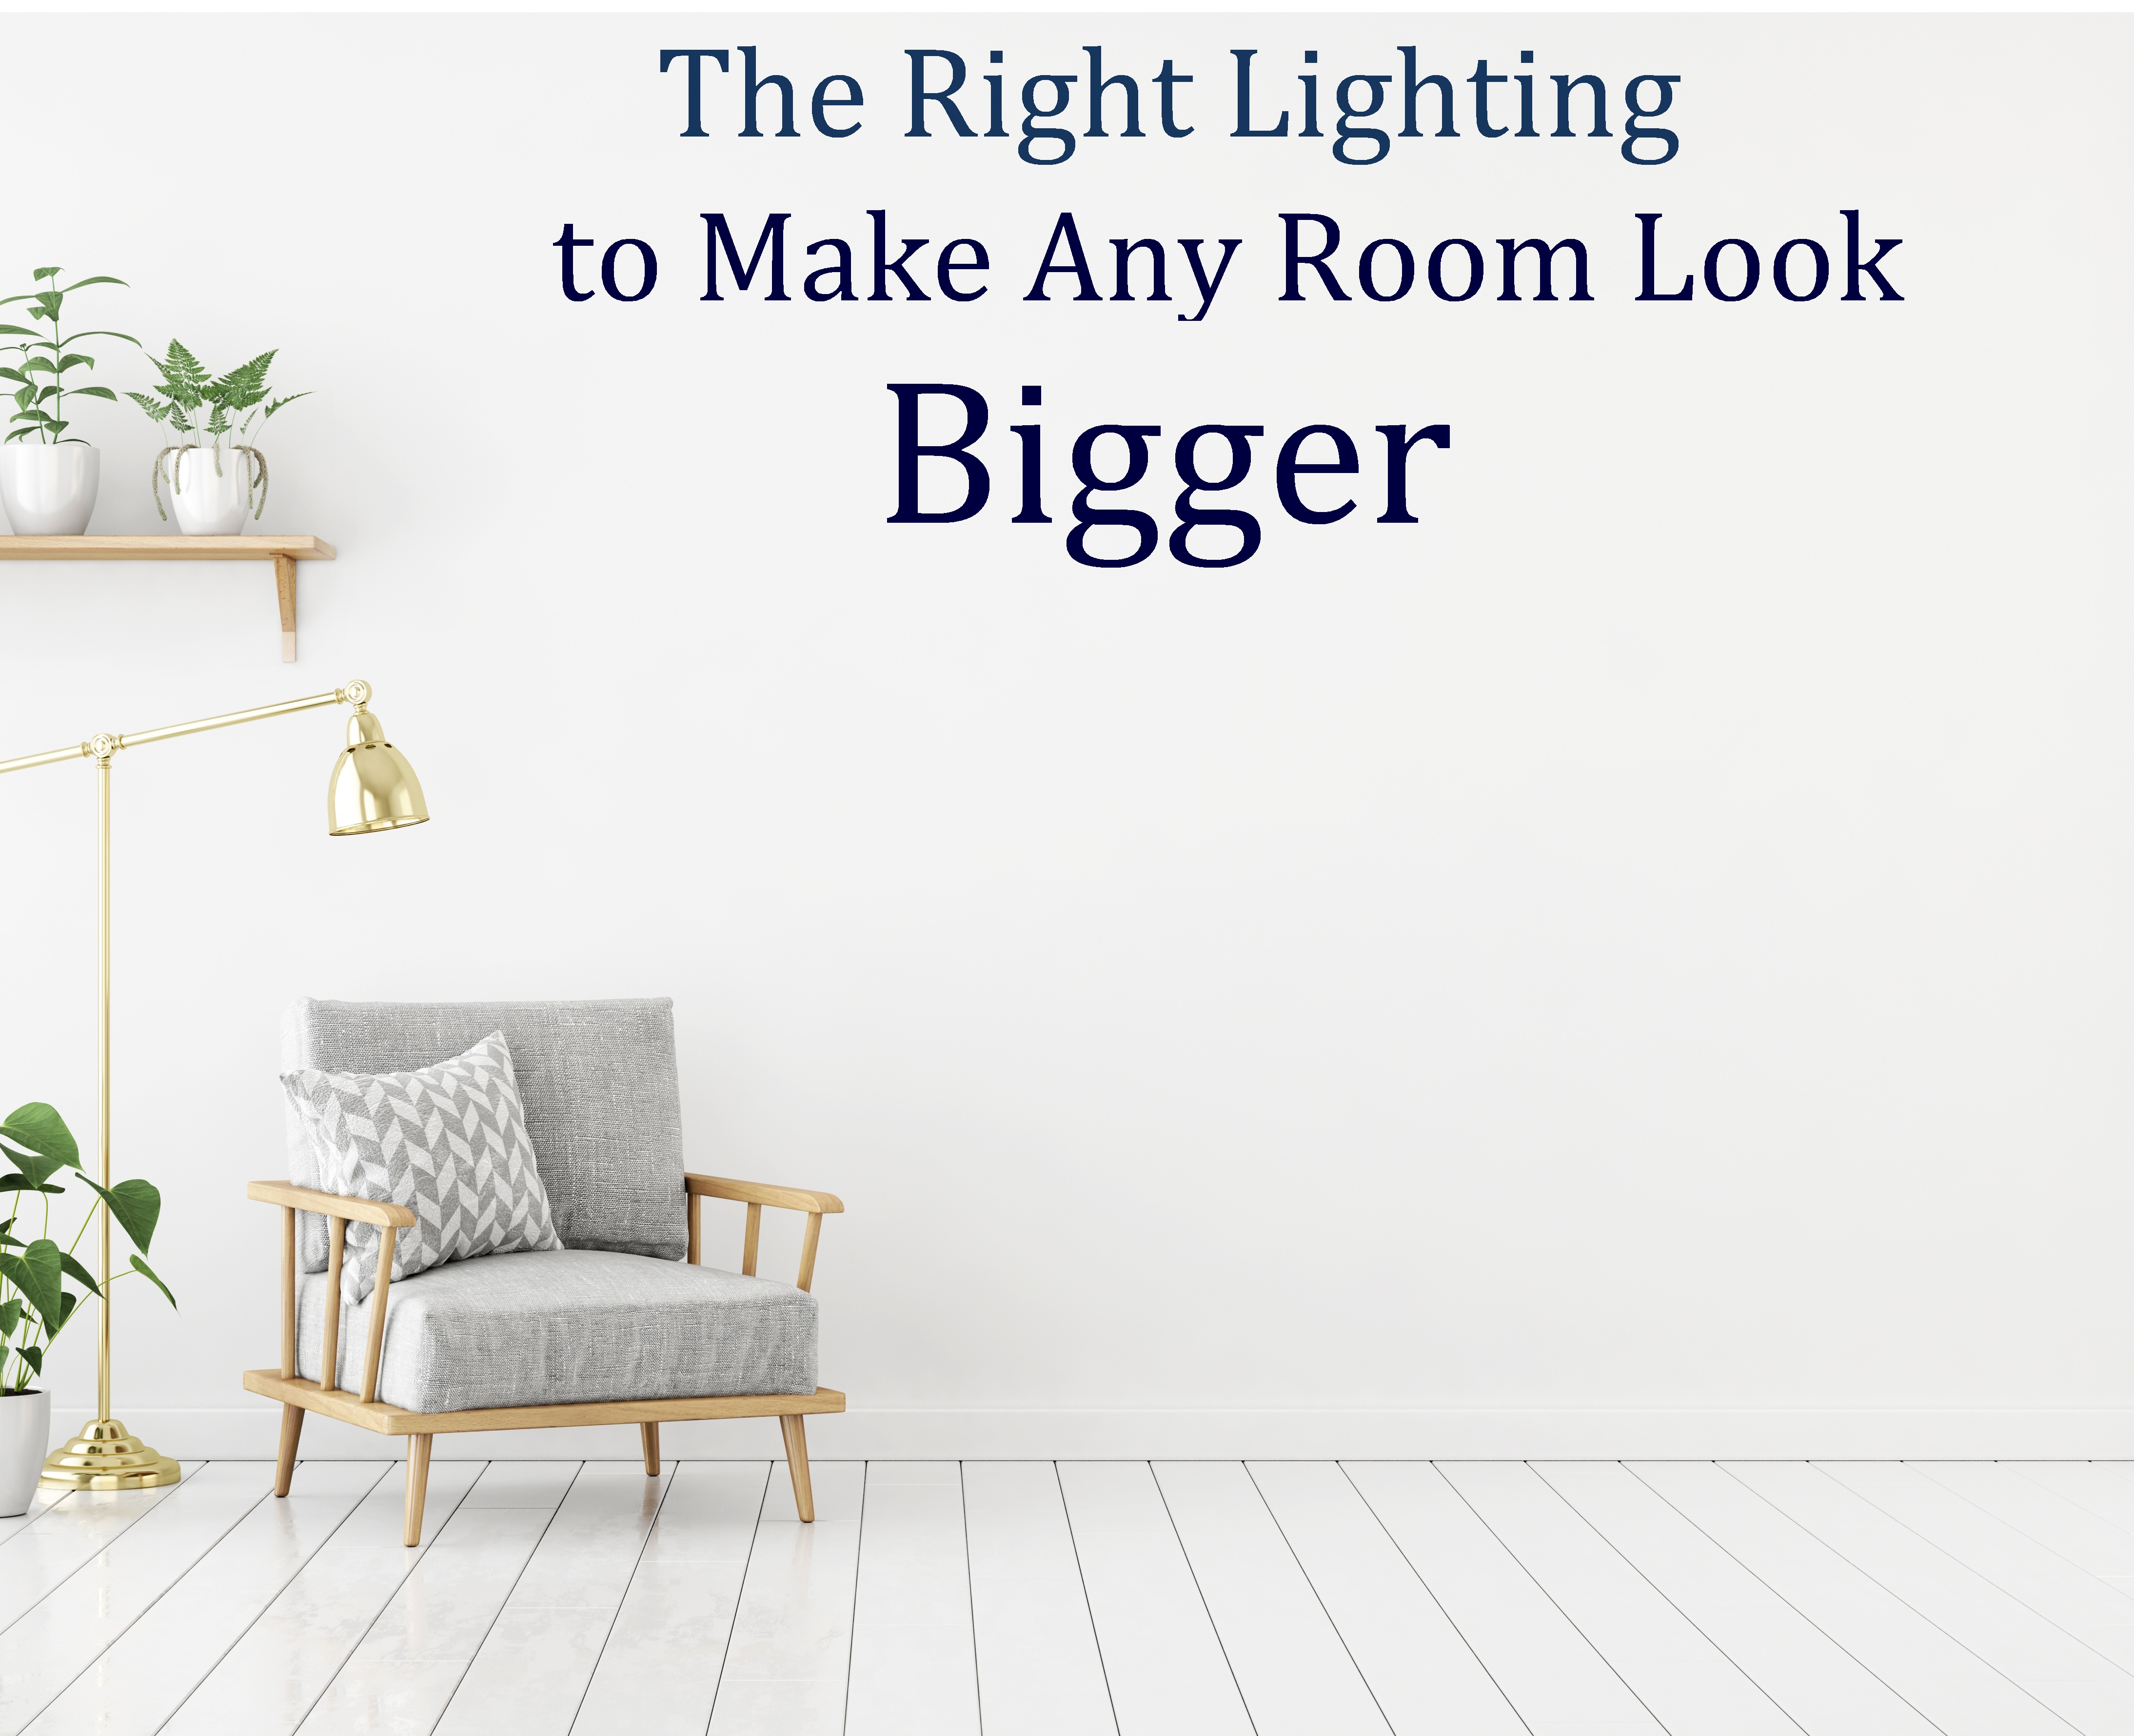 The Right Lighting Methods to Make Any Room Look Bigger